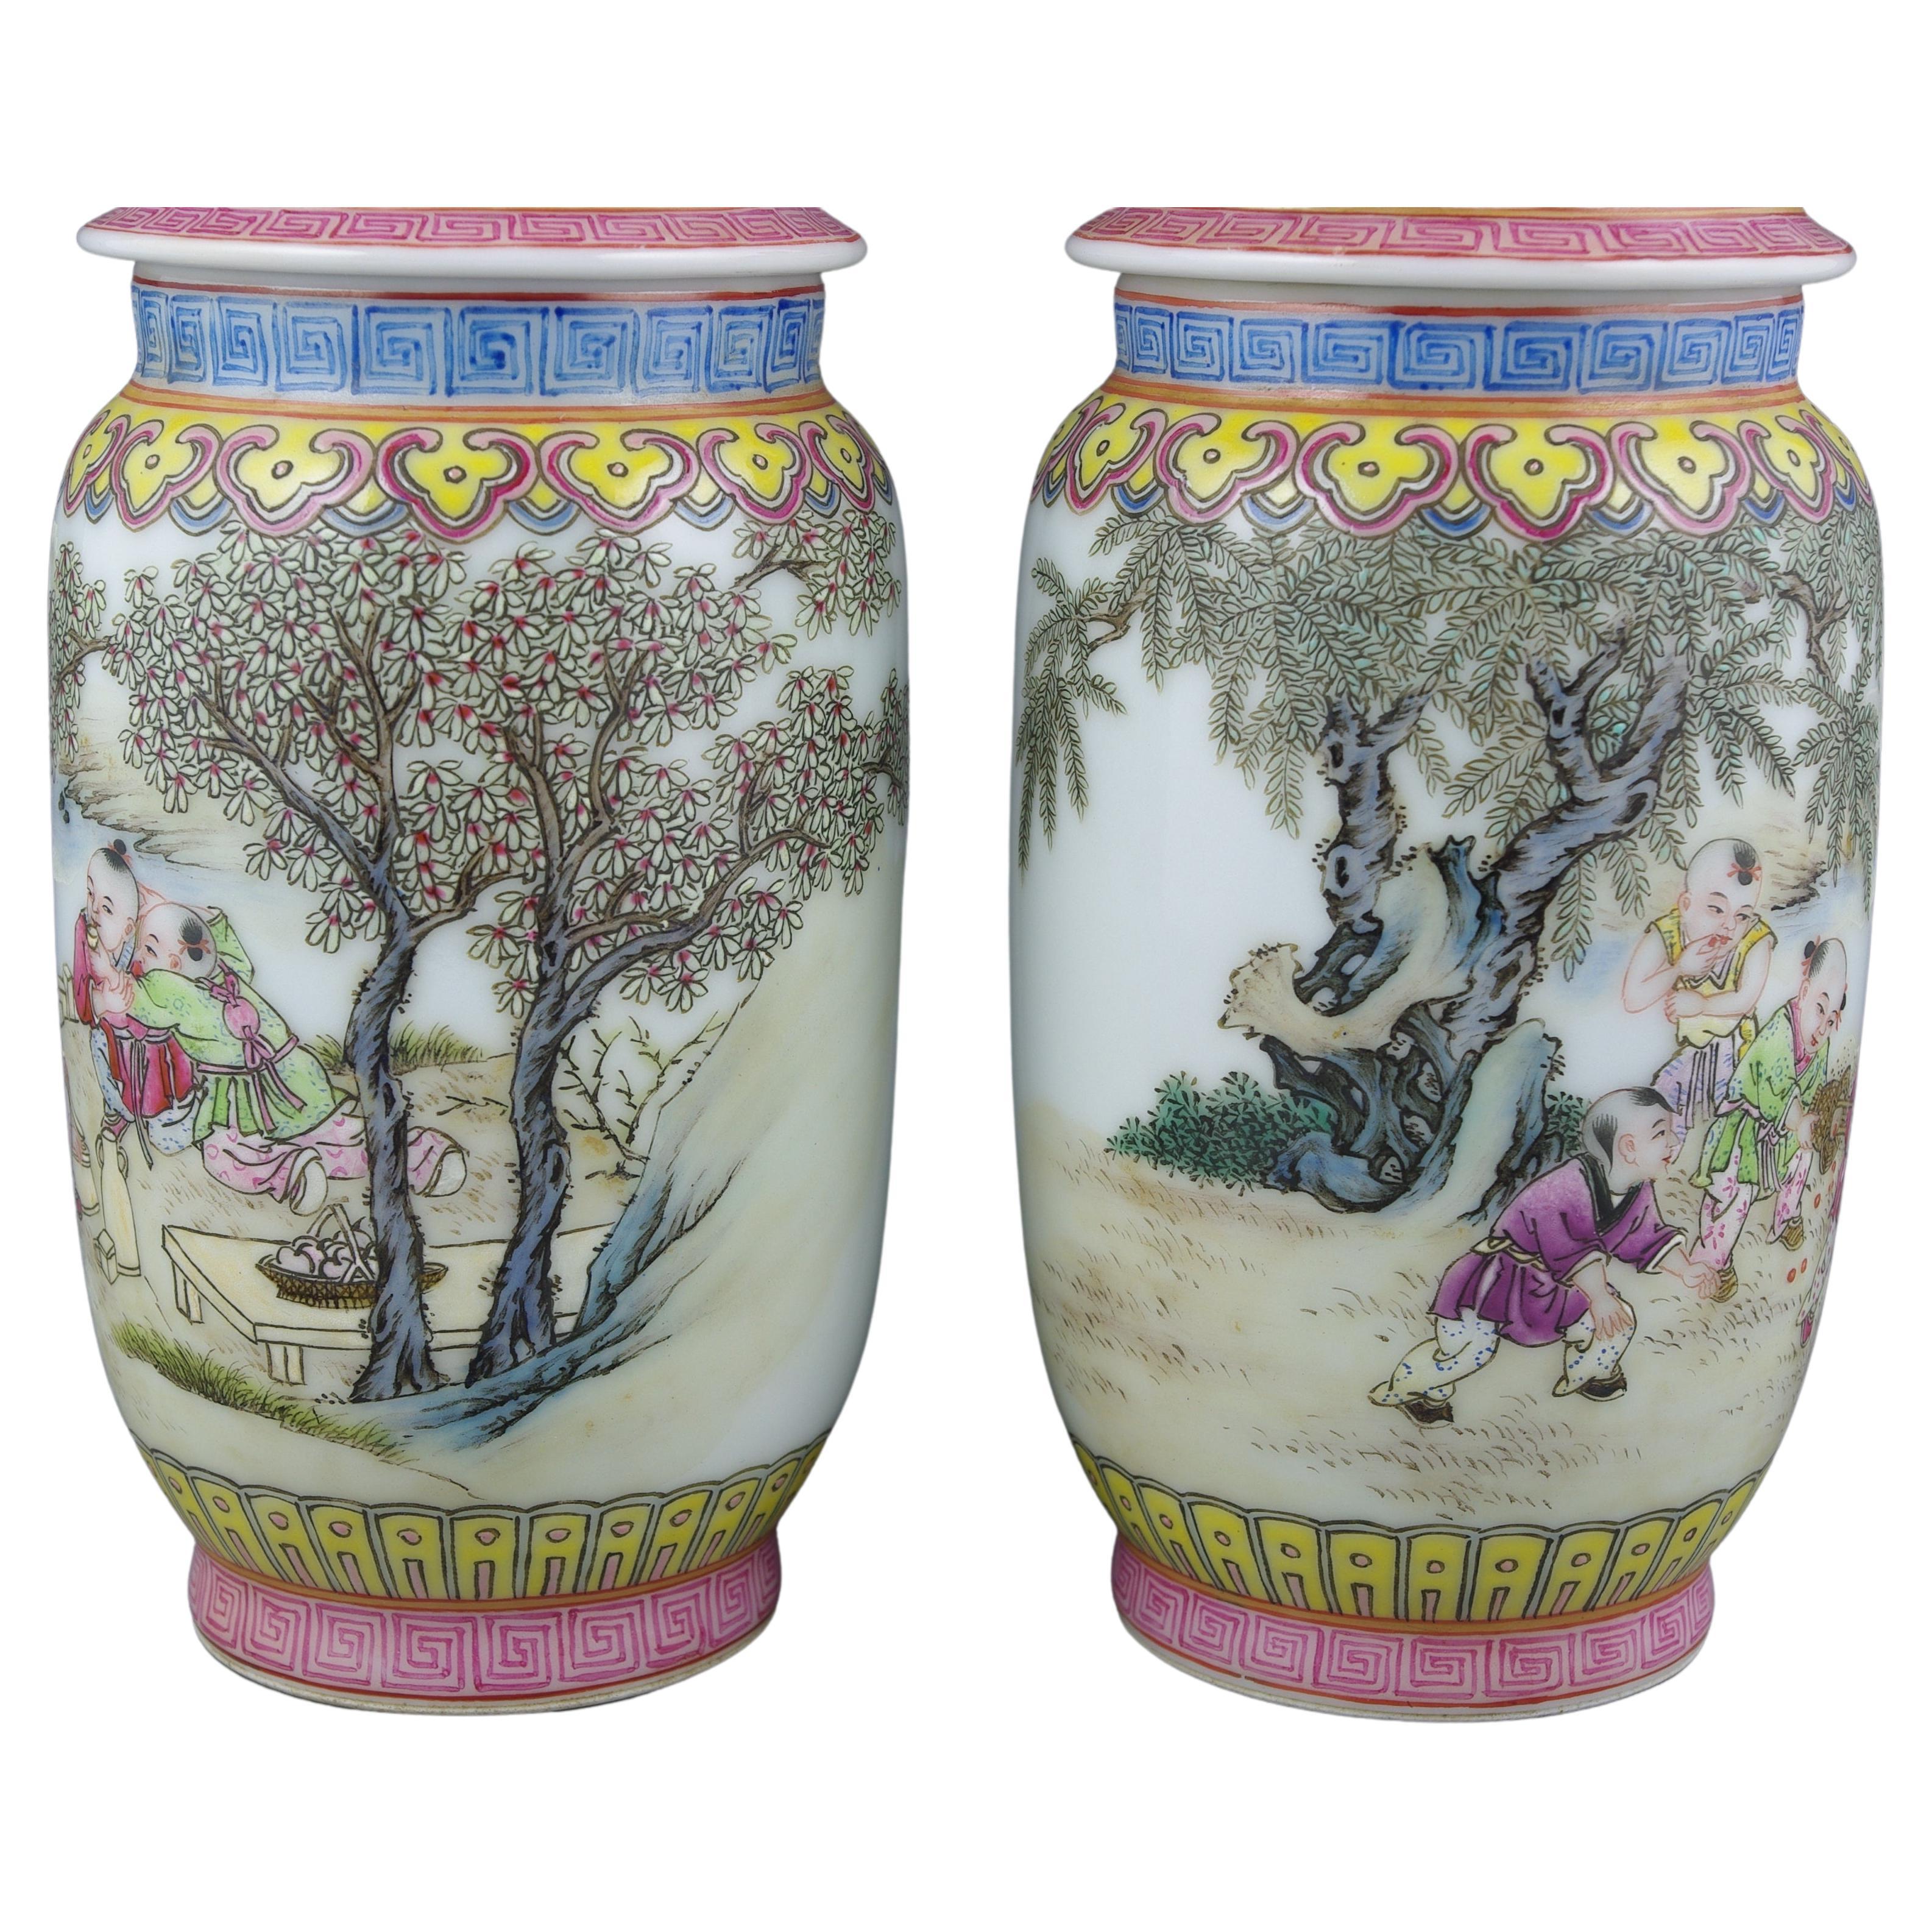 Finest Chinese Porcelain Fencai Covered Jars Children Playing Qing Style 20c  For Sale 2